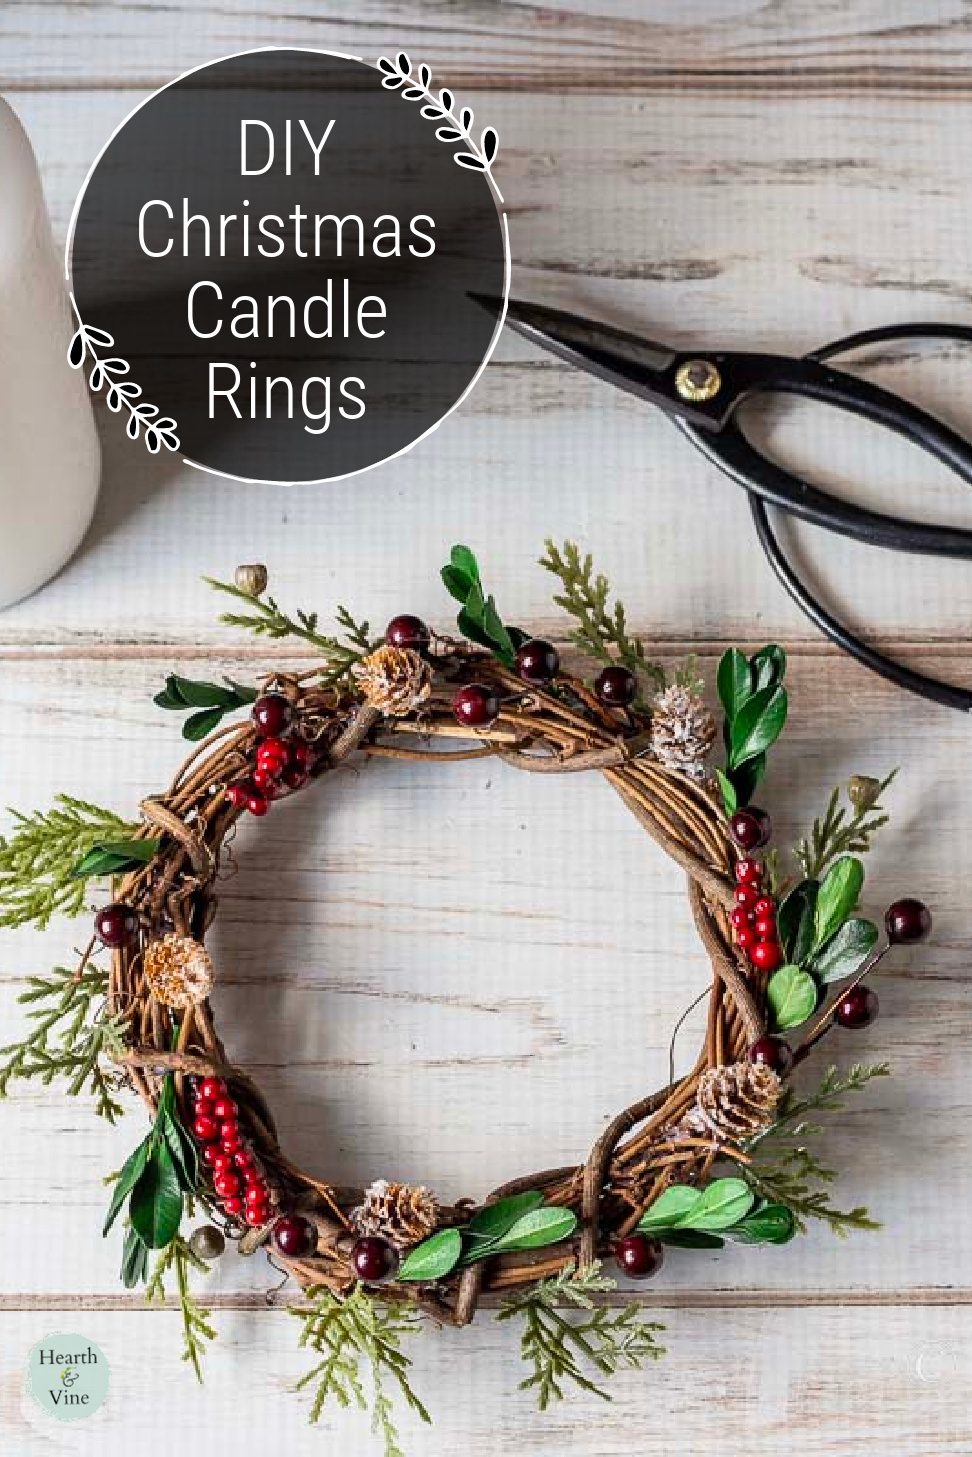 A holiday themed candle wreath with scissors and a pillar candle on the side.